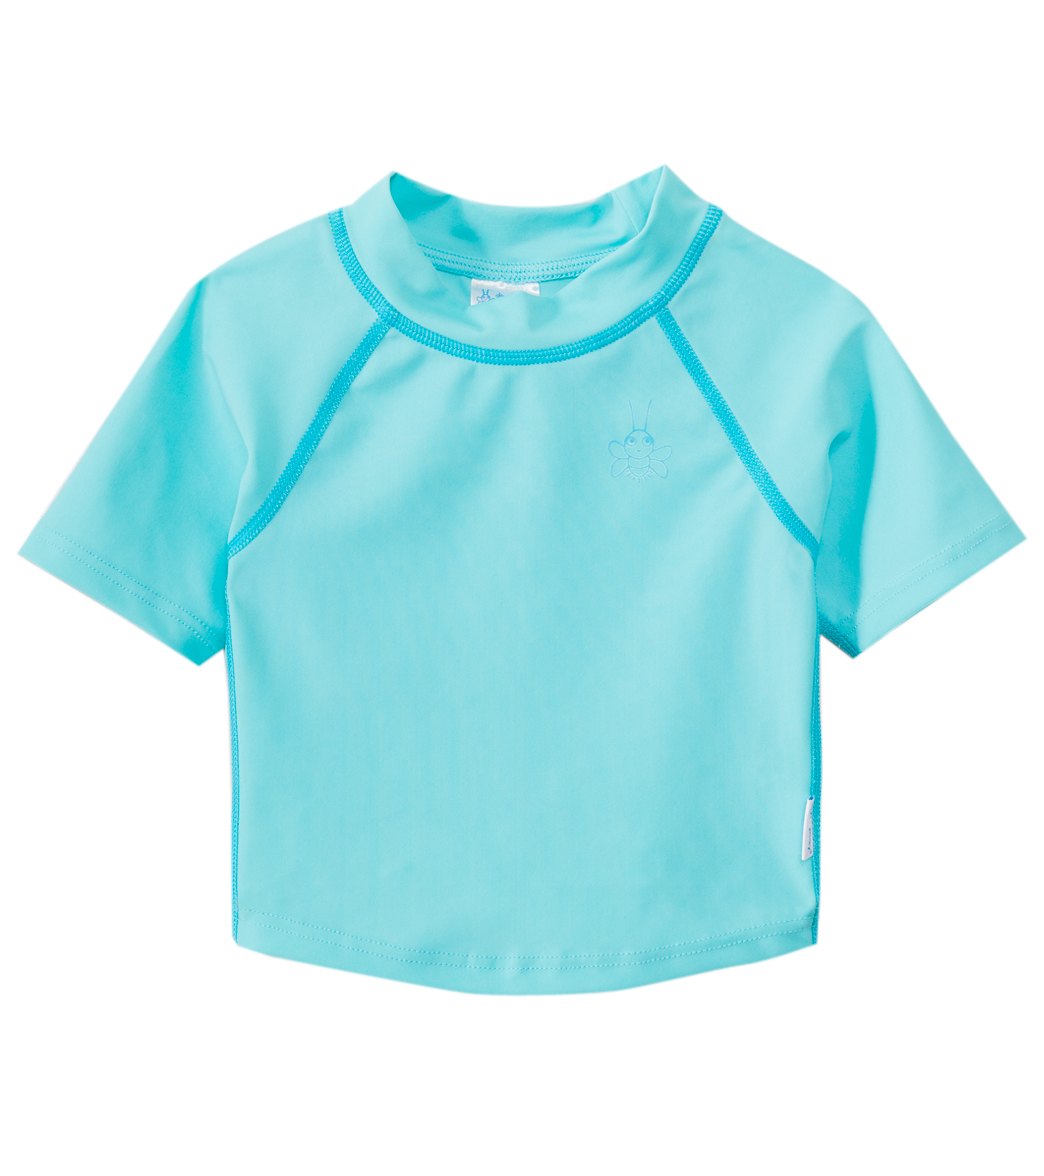 I Play. By Green Sprouts Short Sleeve Rashguard Baby - Light Aqua 18 Months - Swimoutlet.com